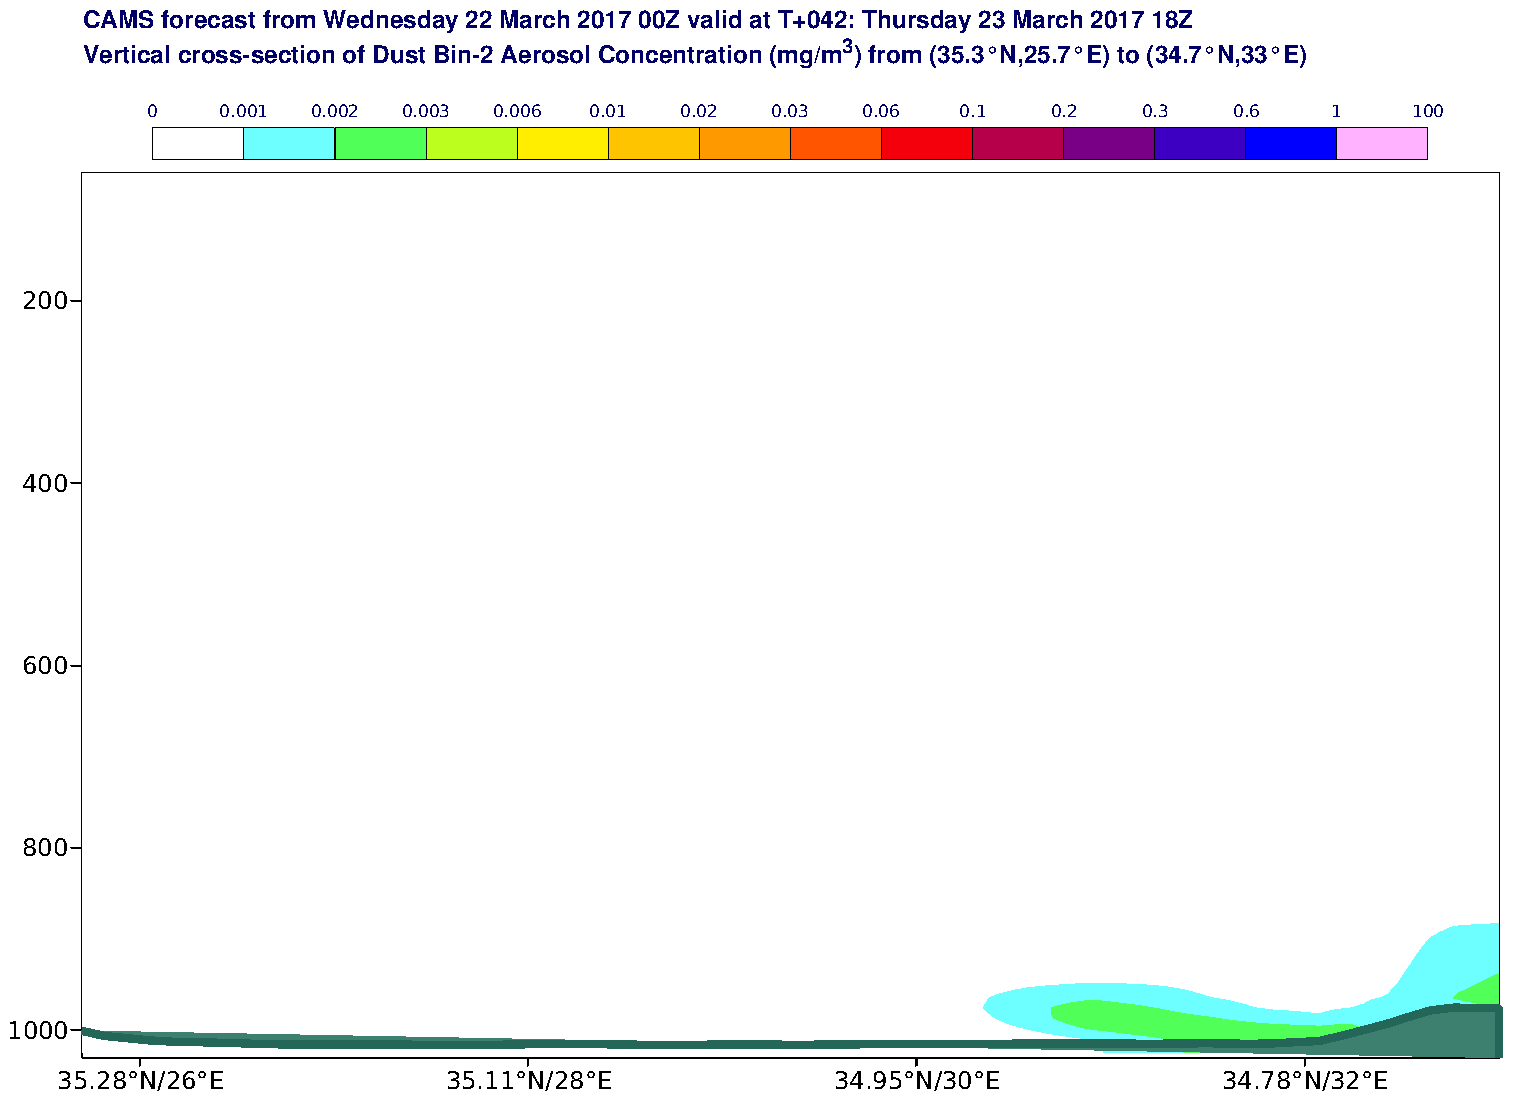 Vertical cross-section of Dust Bin-2 Aerosol Concentration (mg/m3) valid at T42 - 2017-03-23 18:00